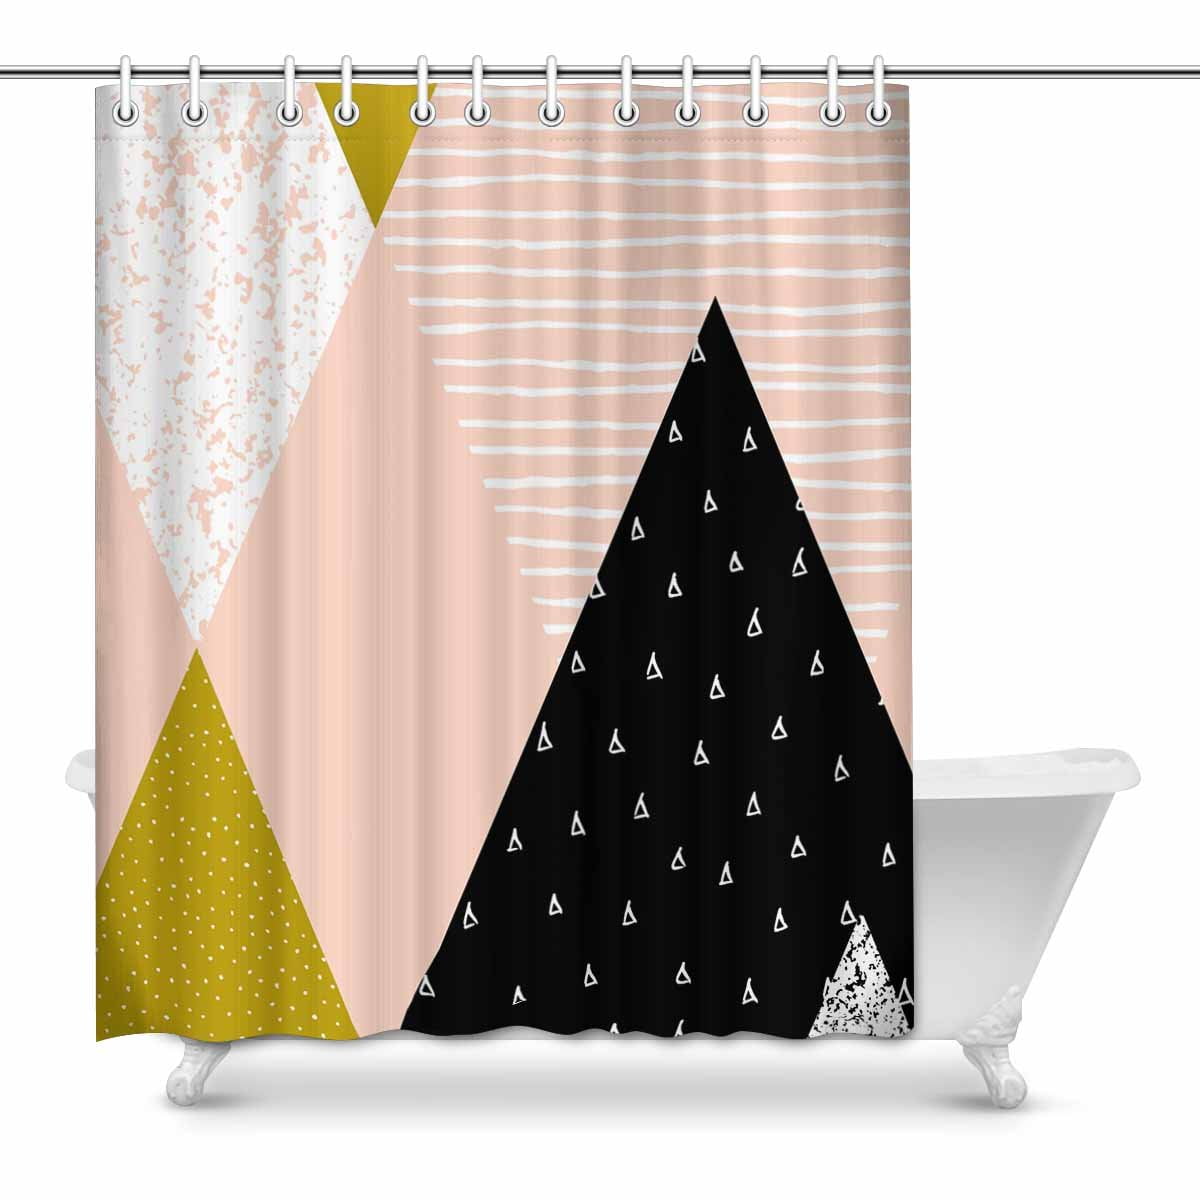 Pink House Decor Shower Curtain, Black White And Gold Shower Curtain